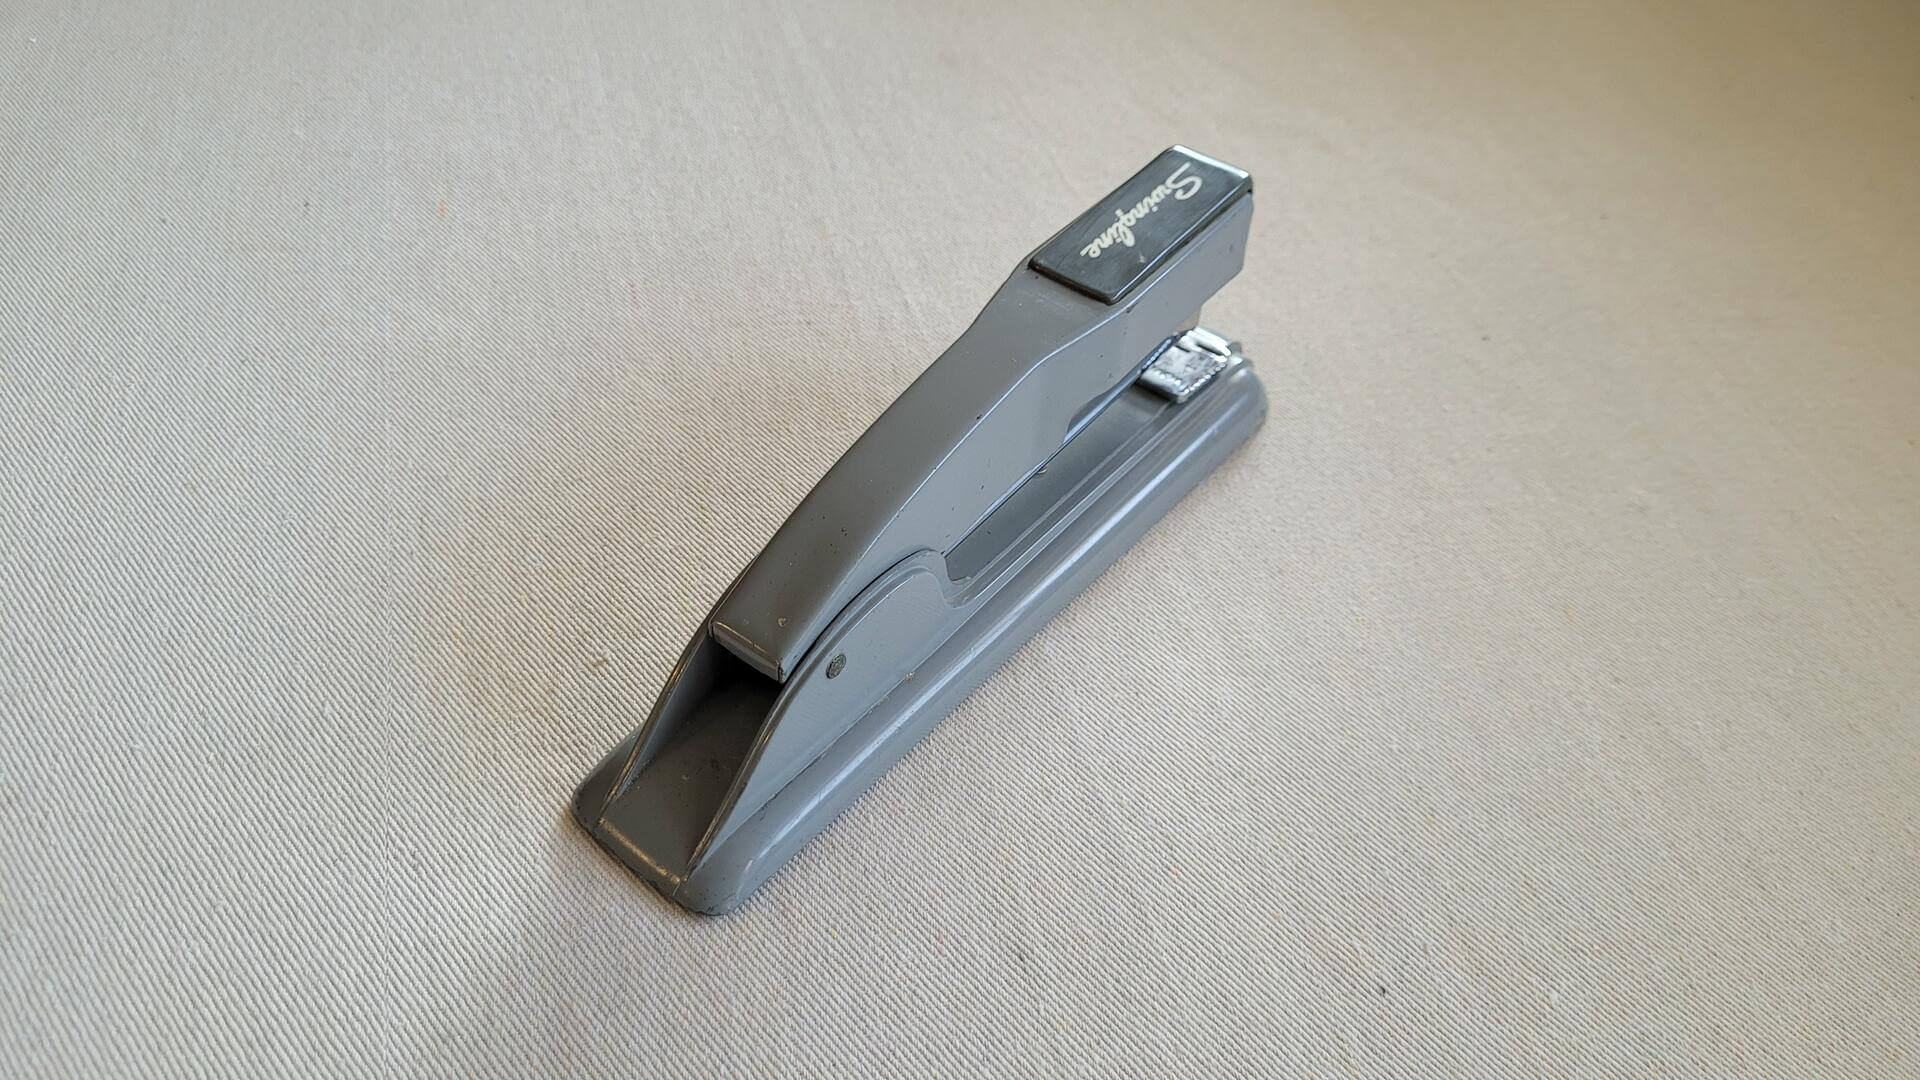 Retro 1950s swingline No. 27 steel Art Deco style stapler in battleship gray colour. Vintage made in USA MCM collectible office equipment & desk accessories